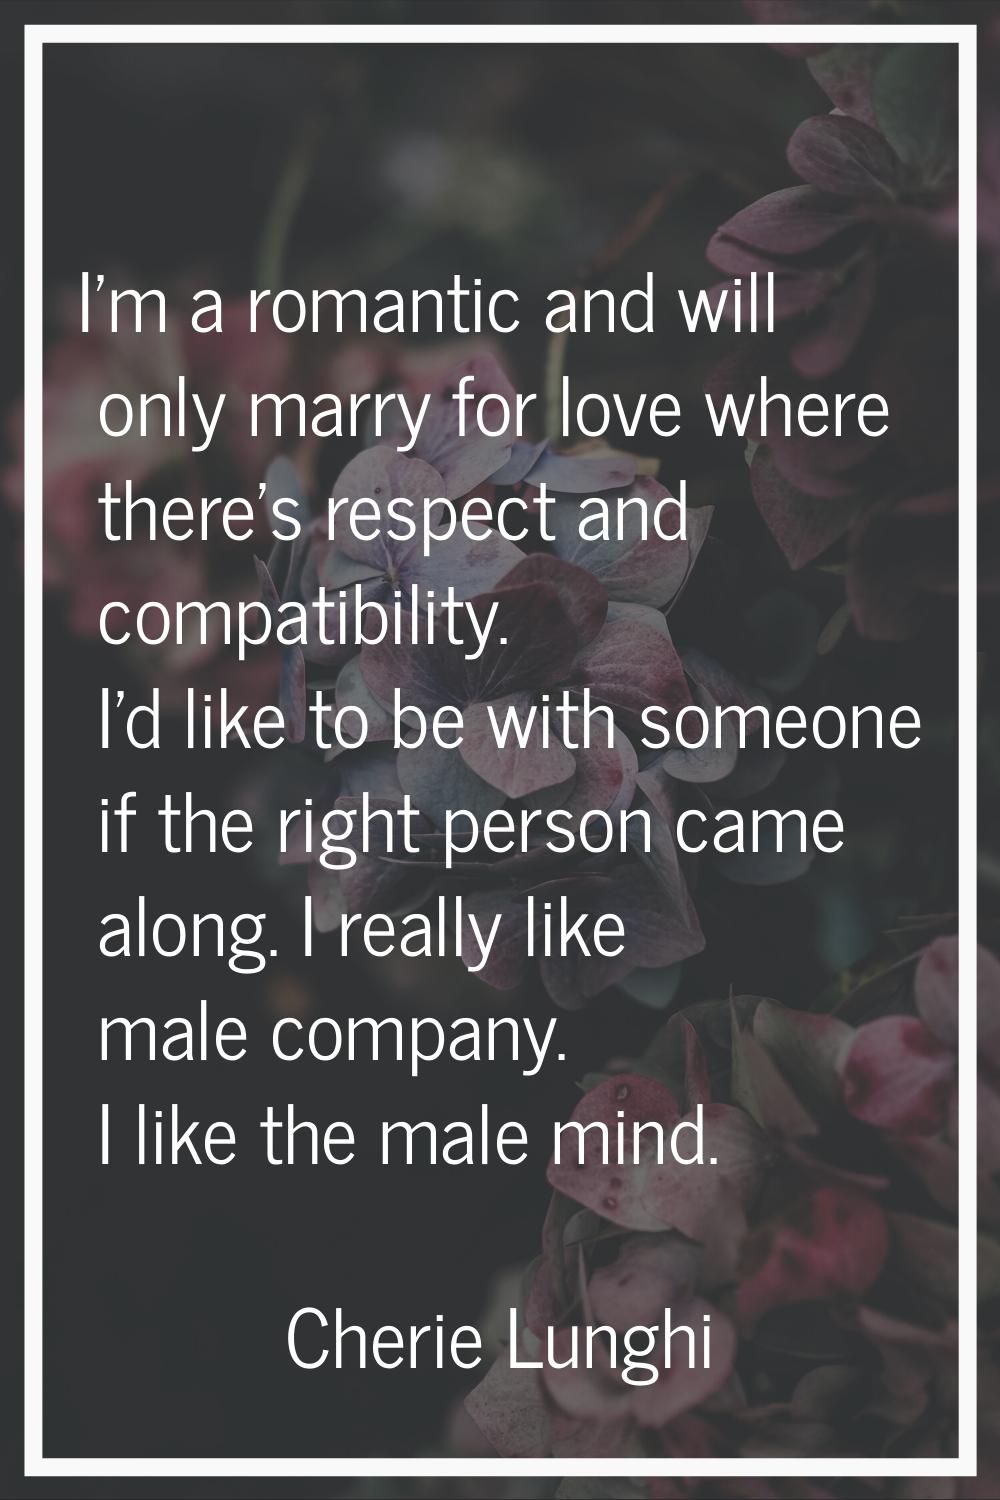 I'm a romantic and will only marry for love where there's respect and compatibility. I'd like to be